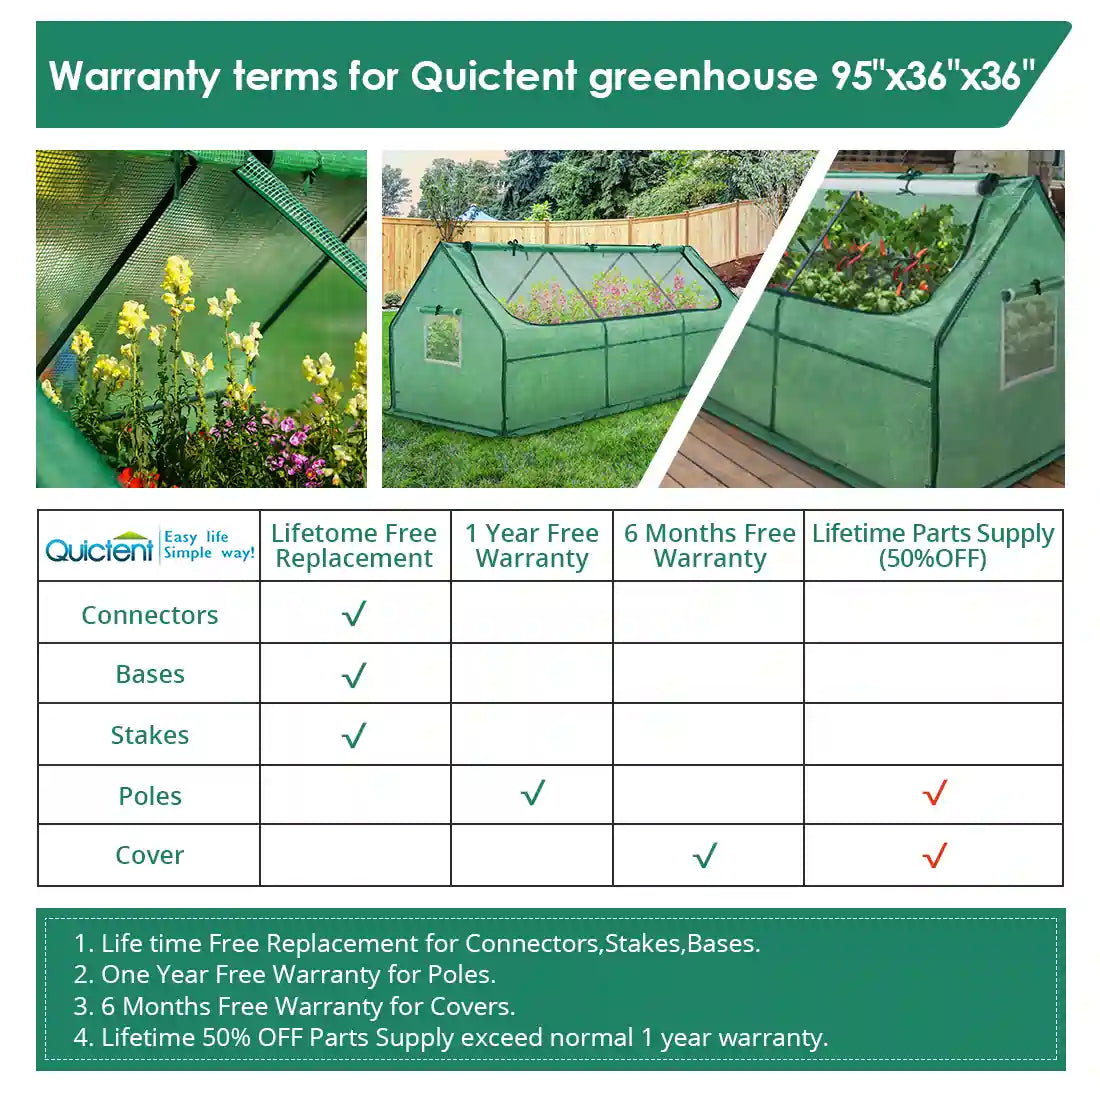 warranty terms for 95”x36"x36" greenhouse#color_green